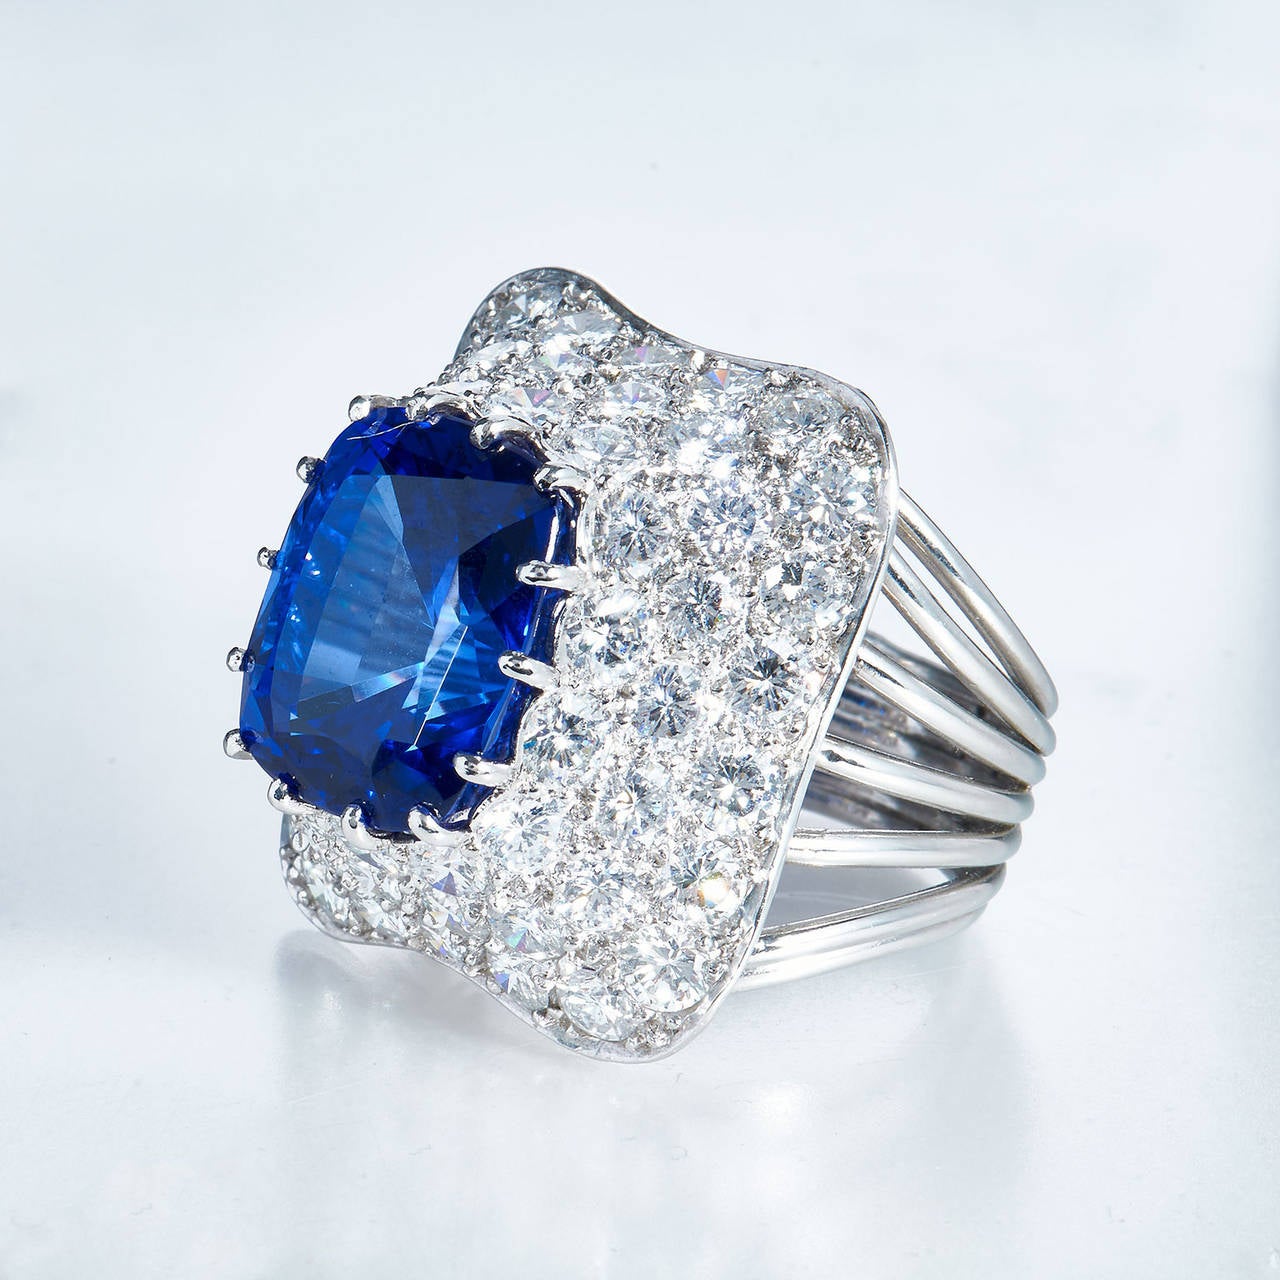 Emulating the natural beauty of the moon and stars, this 1970's platinum cocktail ring features a luscious blue 10.18 carat cushion-cut tanzanite enclosed by a pyramid of brilliant-cut, round, white diamonds graded EF VS1 and totaling 54 stones with